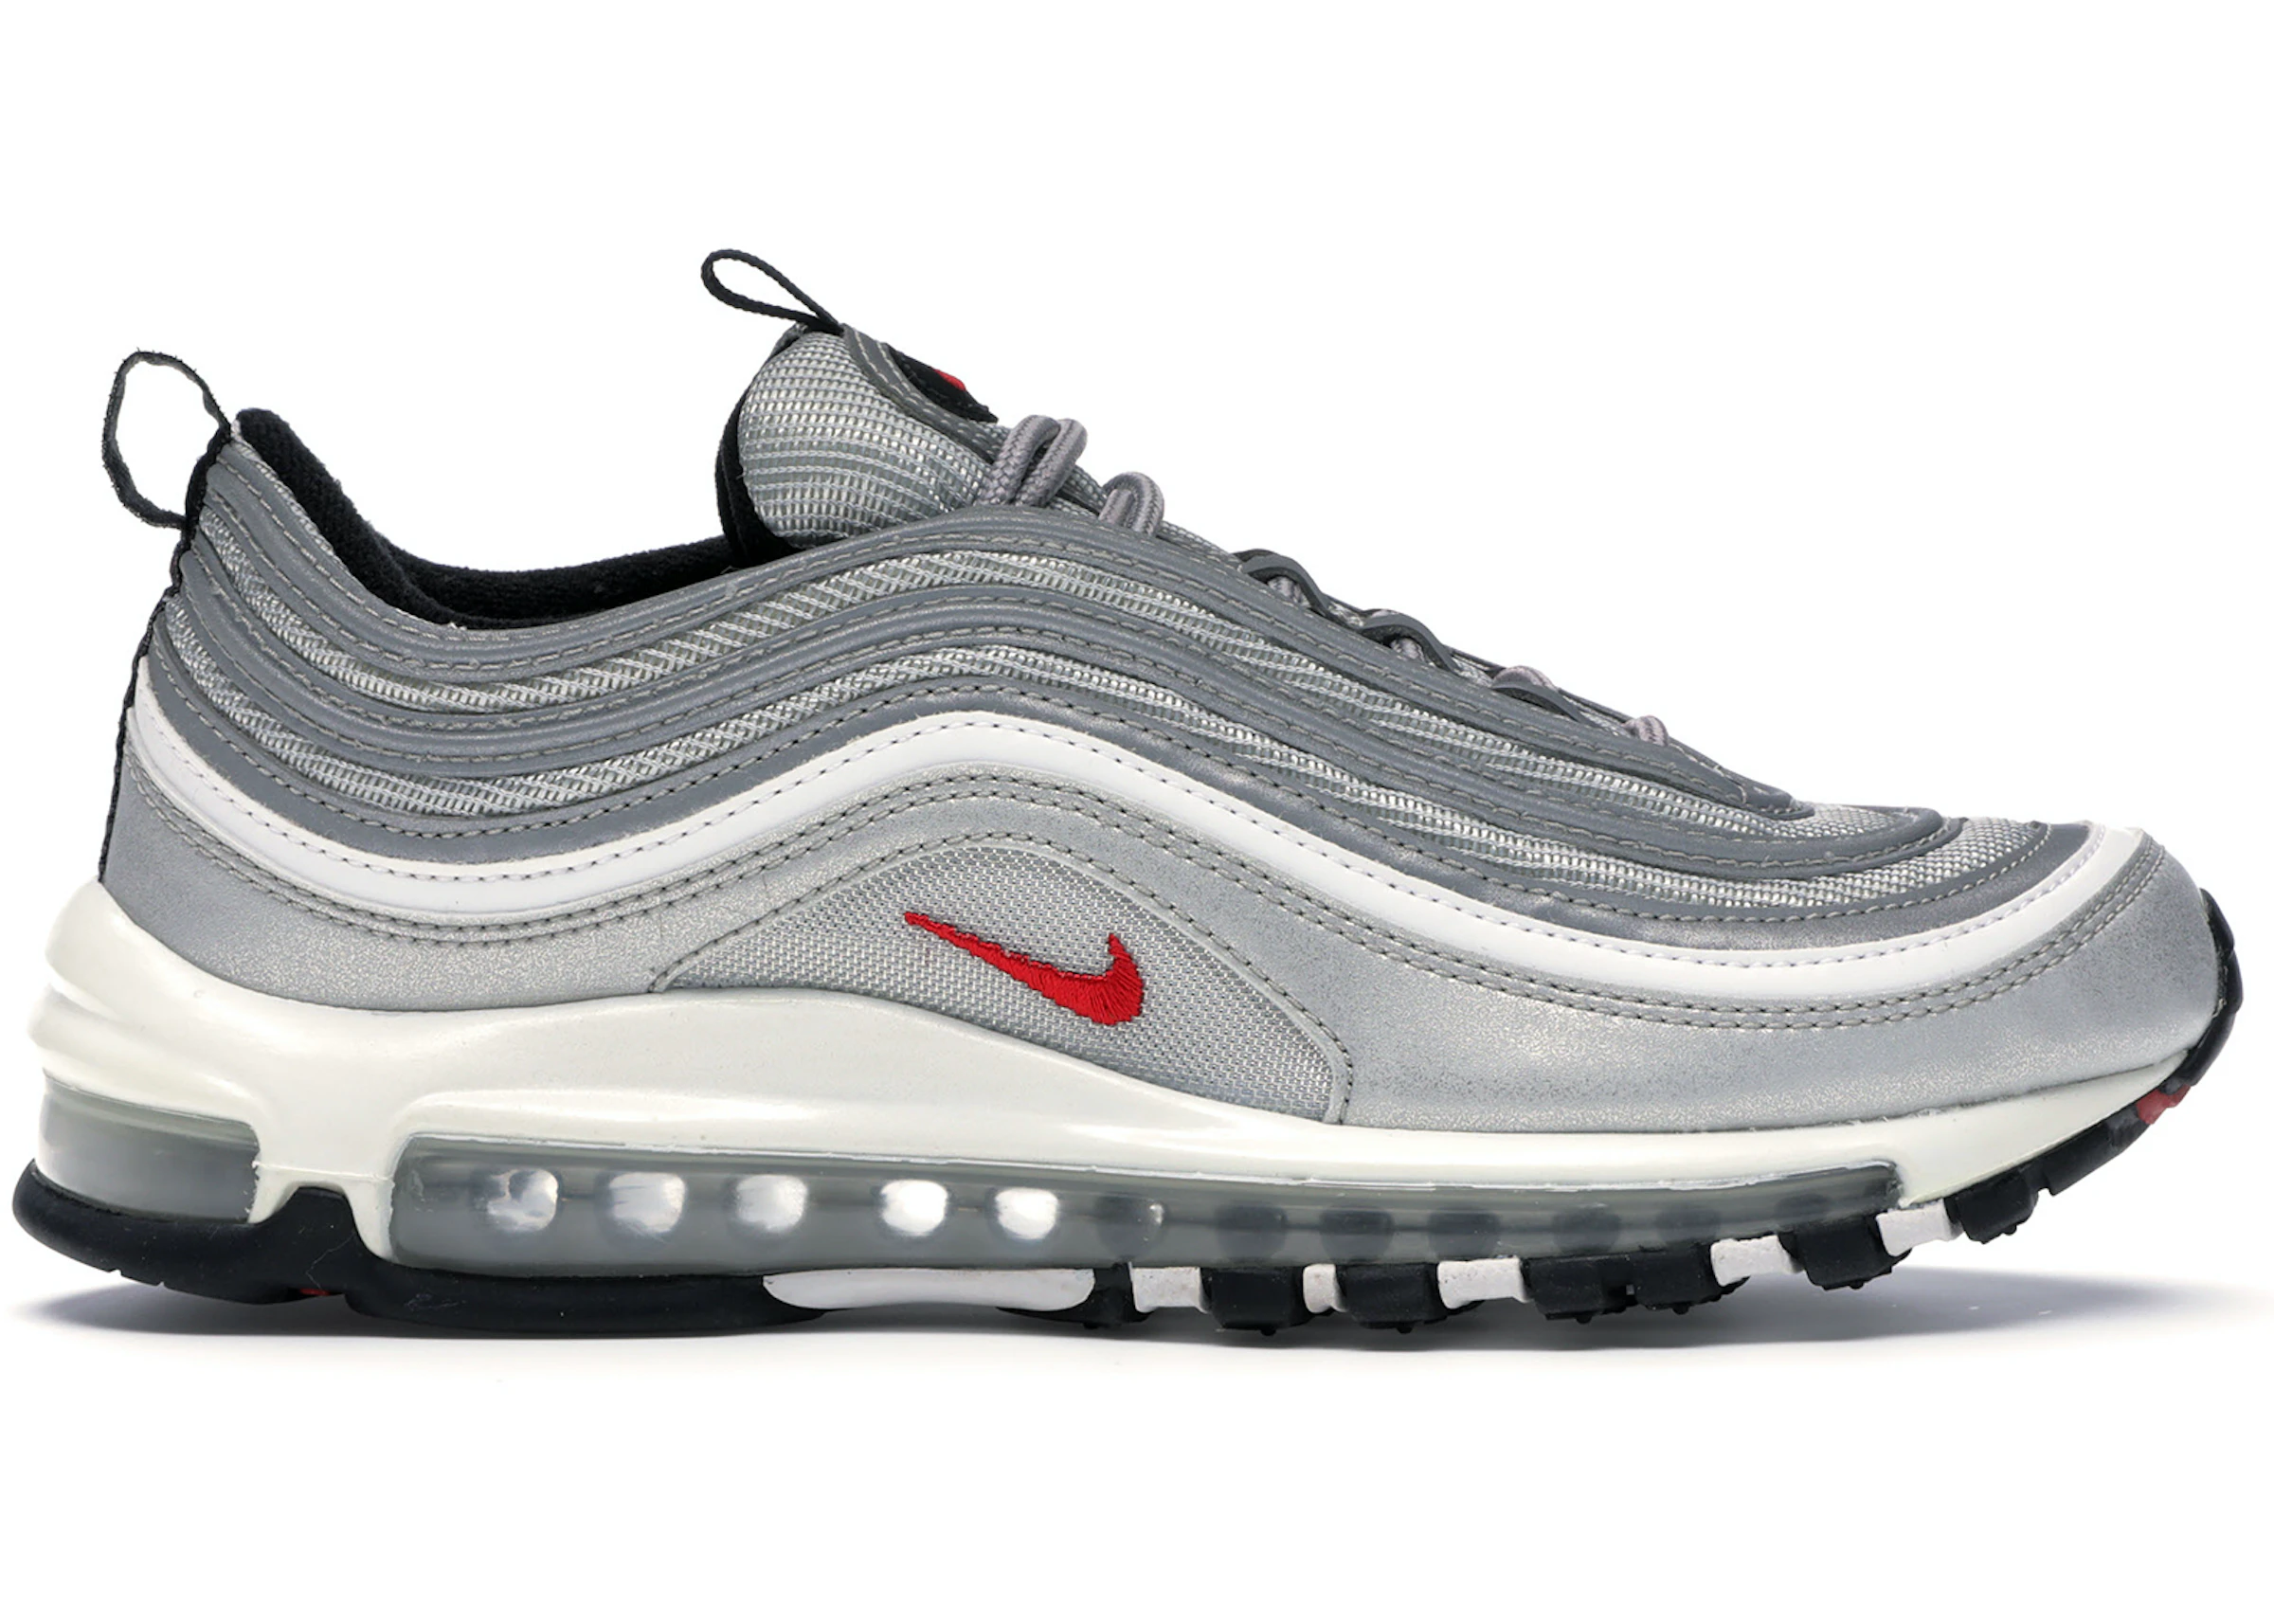 Zenuwinzinking thermometer Tochi boom Nike Air Max 97 Silver Bullet (2016/2017) - 884421-001 - US